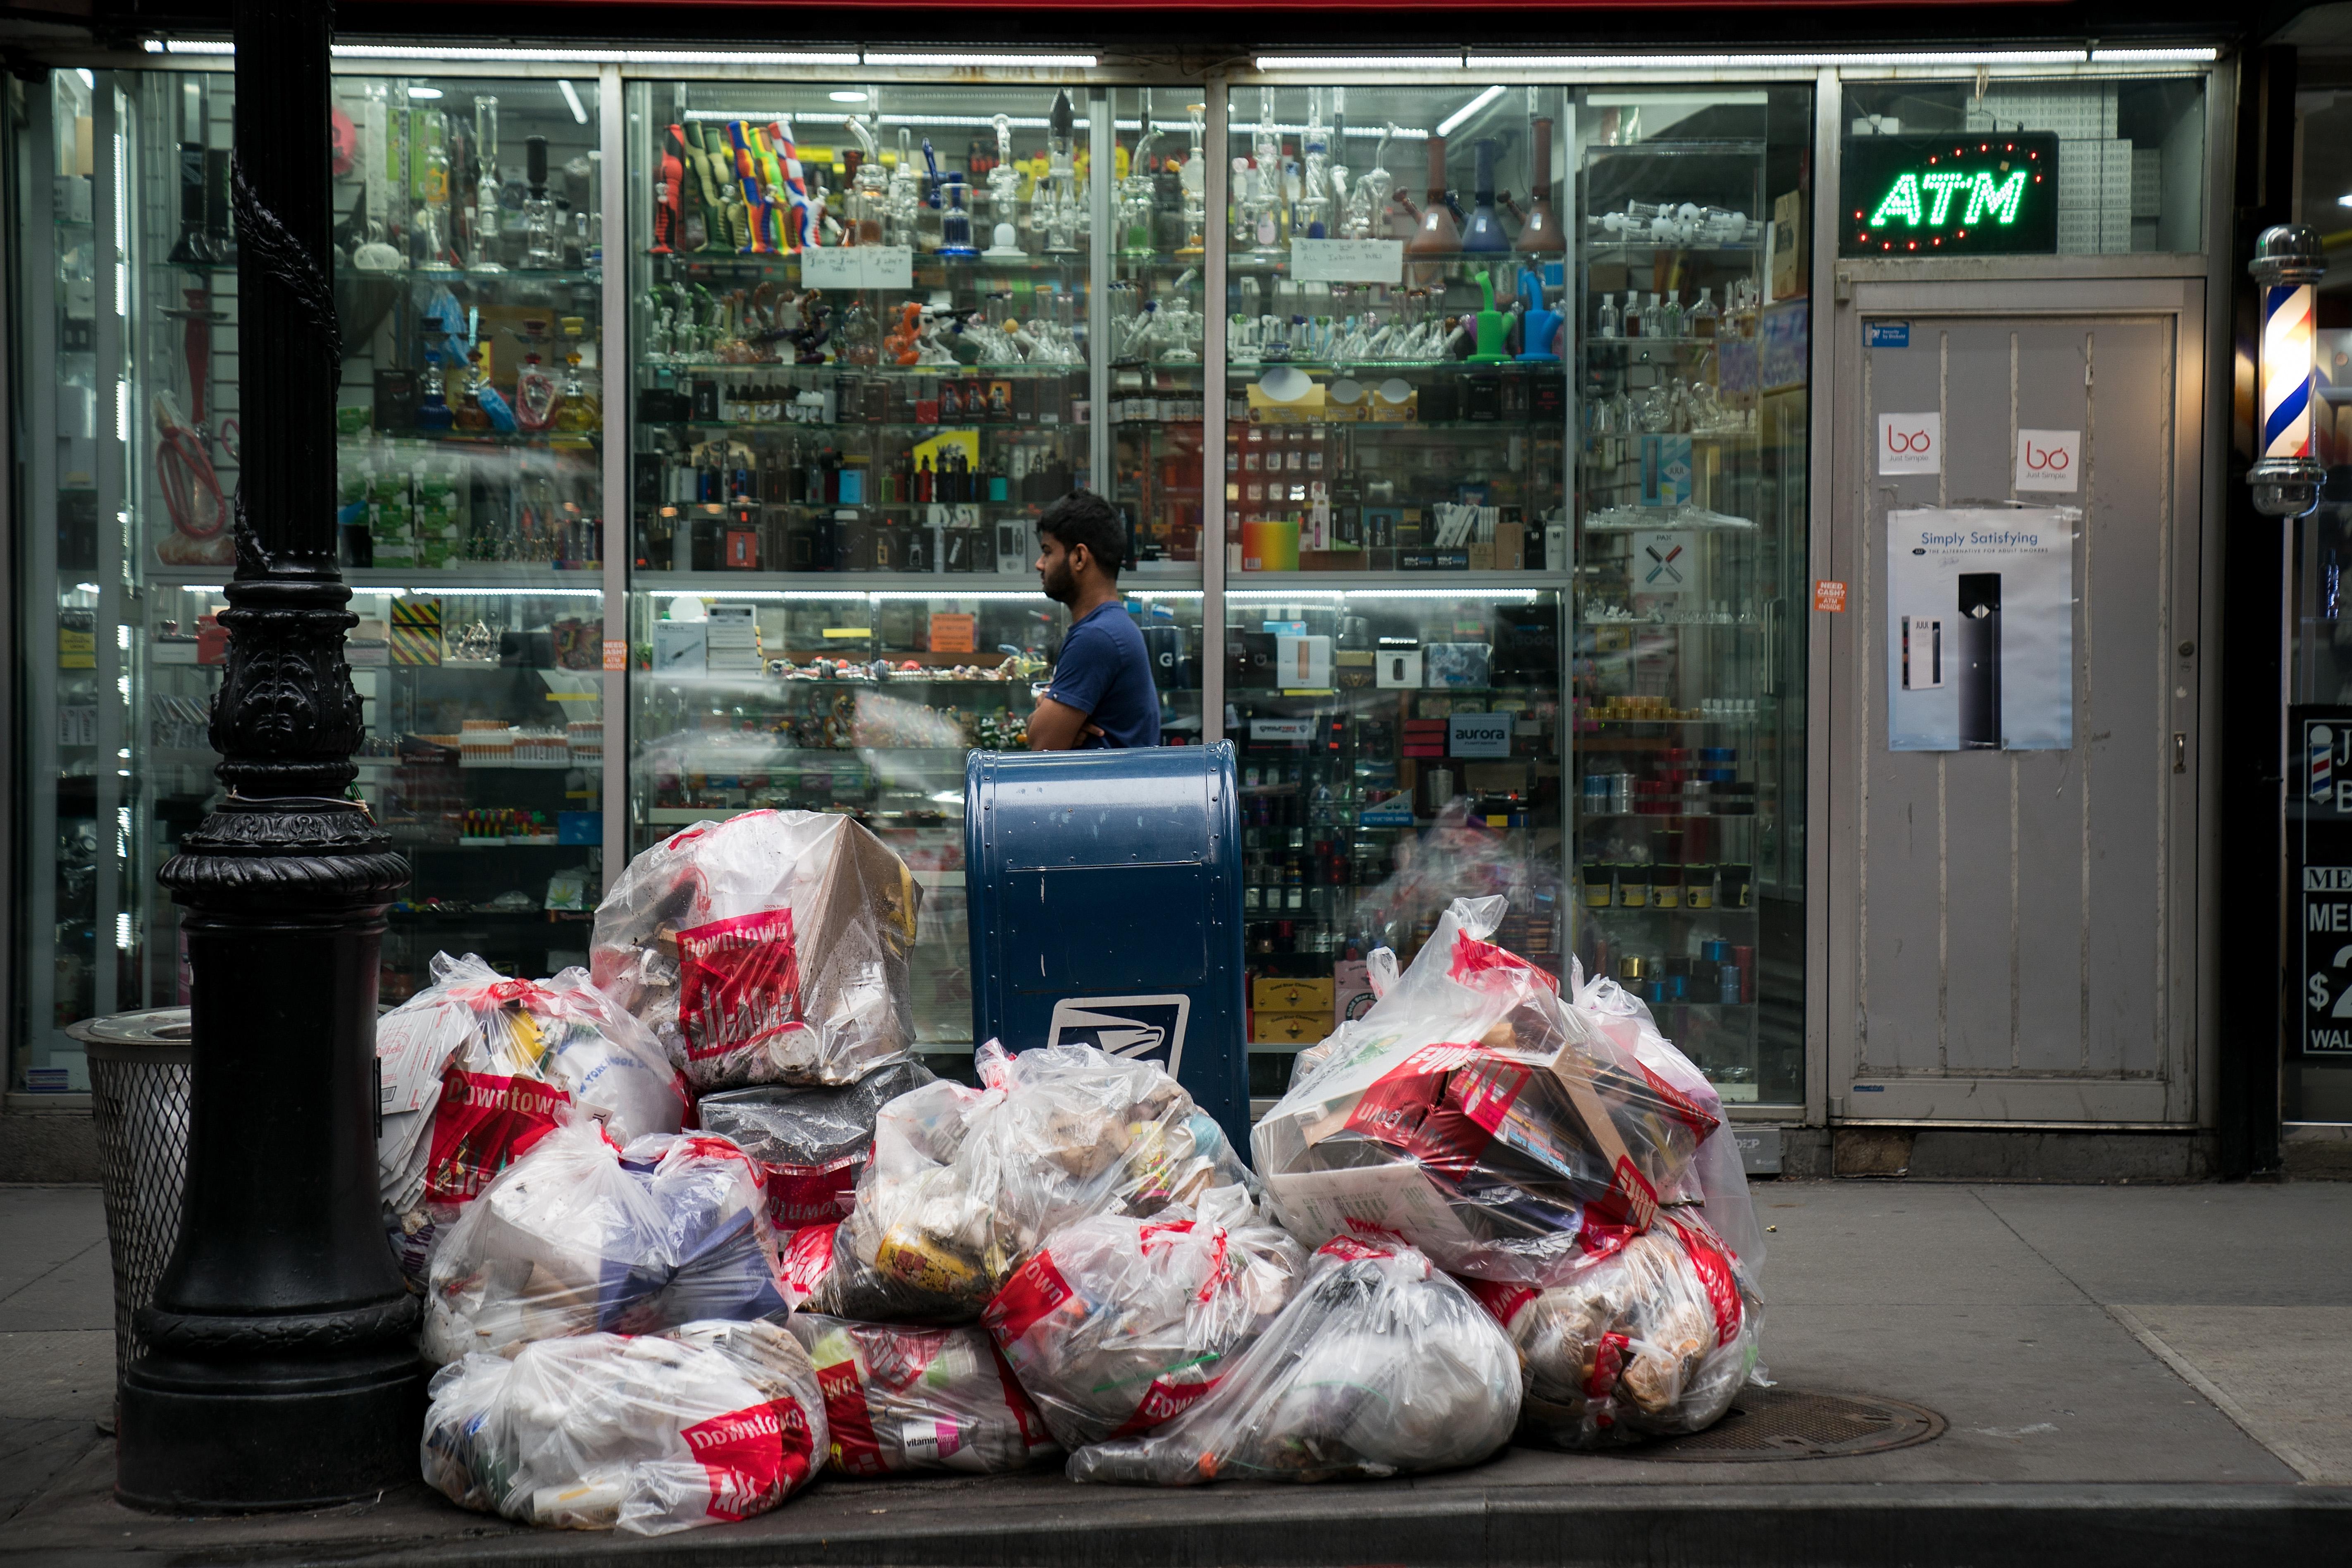 NEW YORK, NY - FEBRUARY 22: A pedestrian walks past bags of trash on a sidewalk in Lower Manhattan, February 22, 2018 in New York City. Using data from Environmental Protection Agency, the American Housing Survey and the U.S. Census Bureau, a new report from the cleaning and janitorial company BusyBee ranks New York City as the dirtiest city in the nation. (Photo by Drew Angerer/Getty Images)